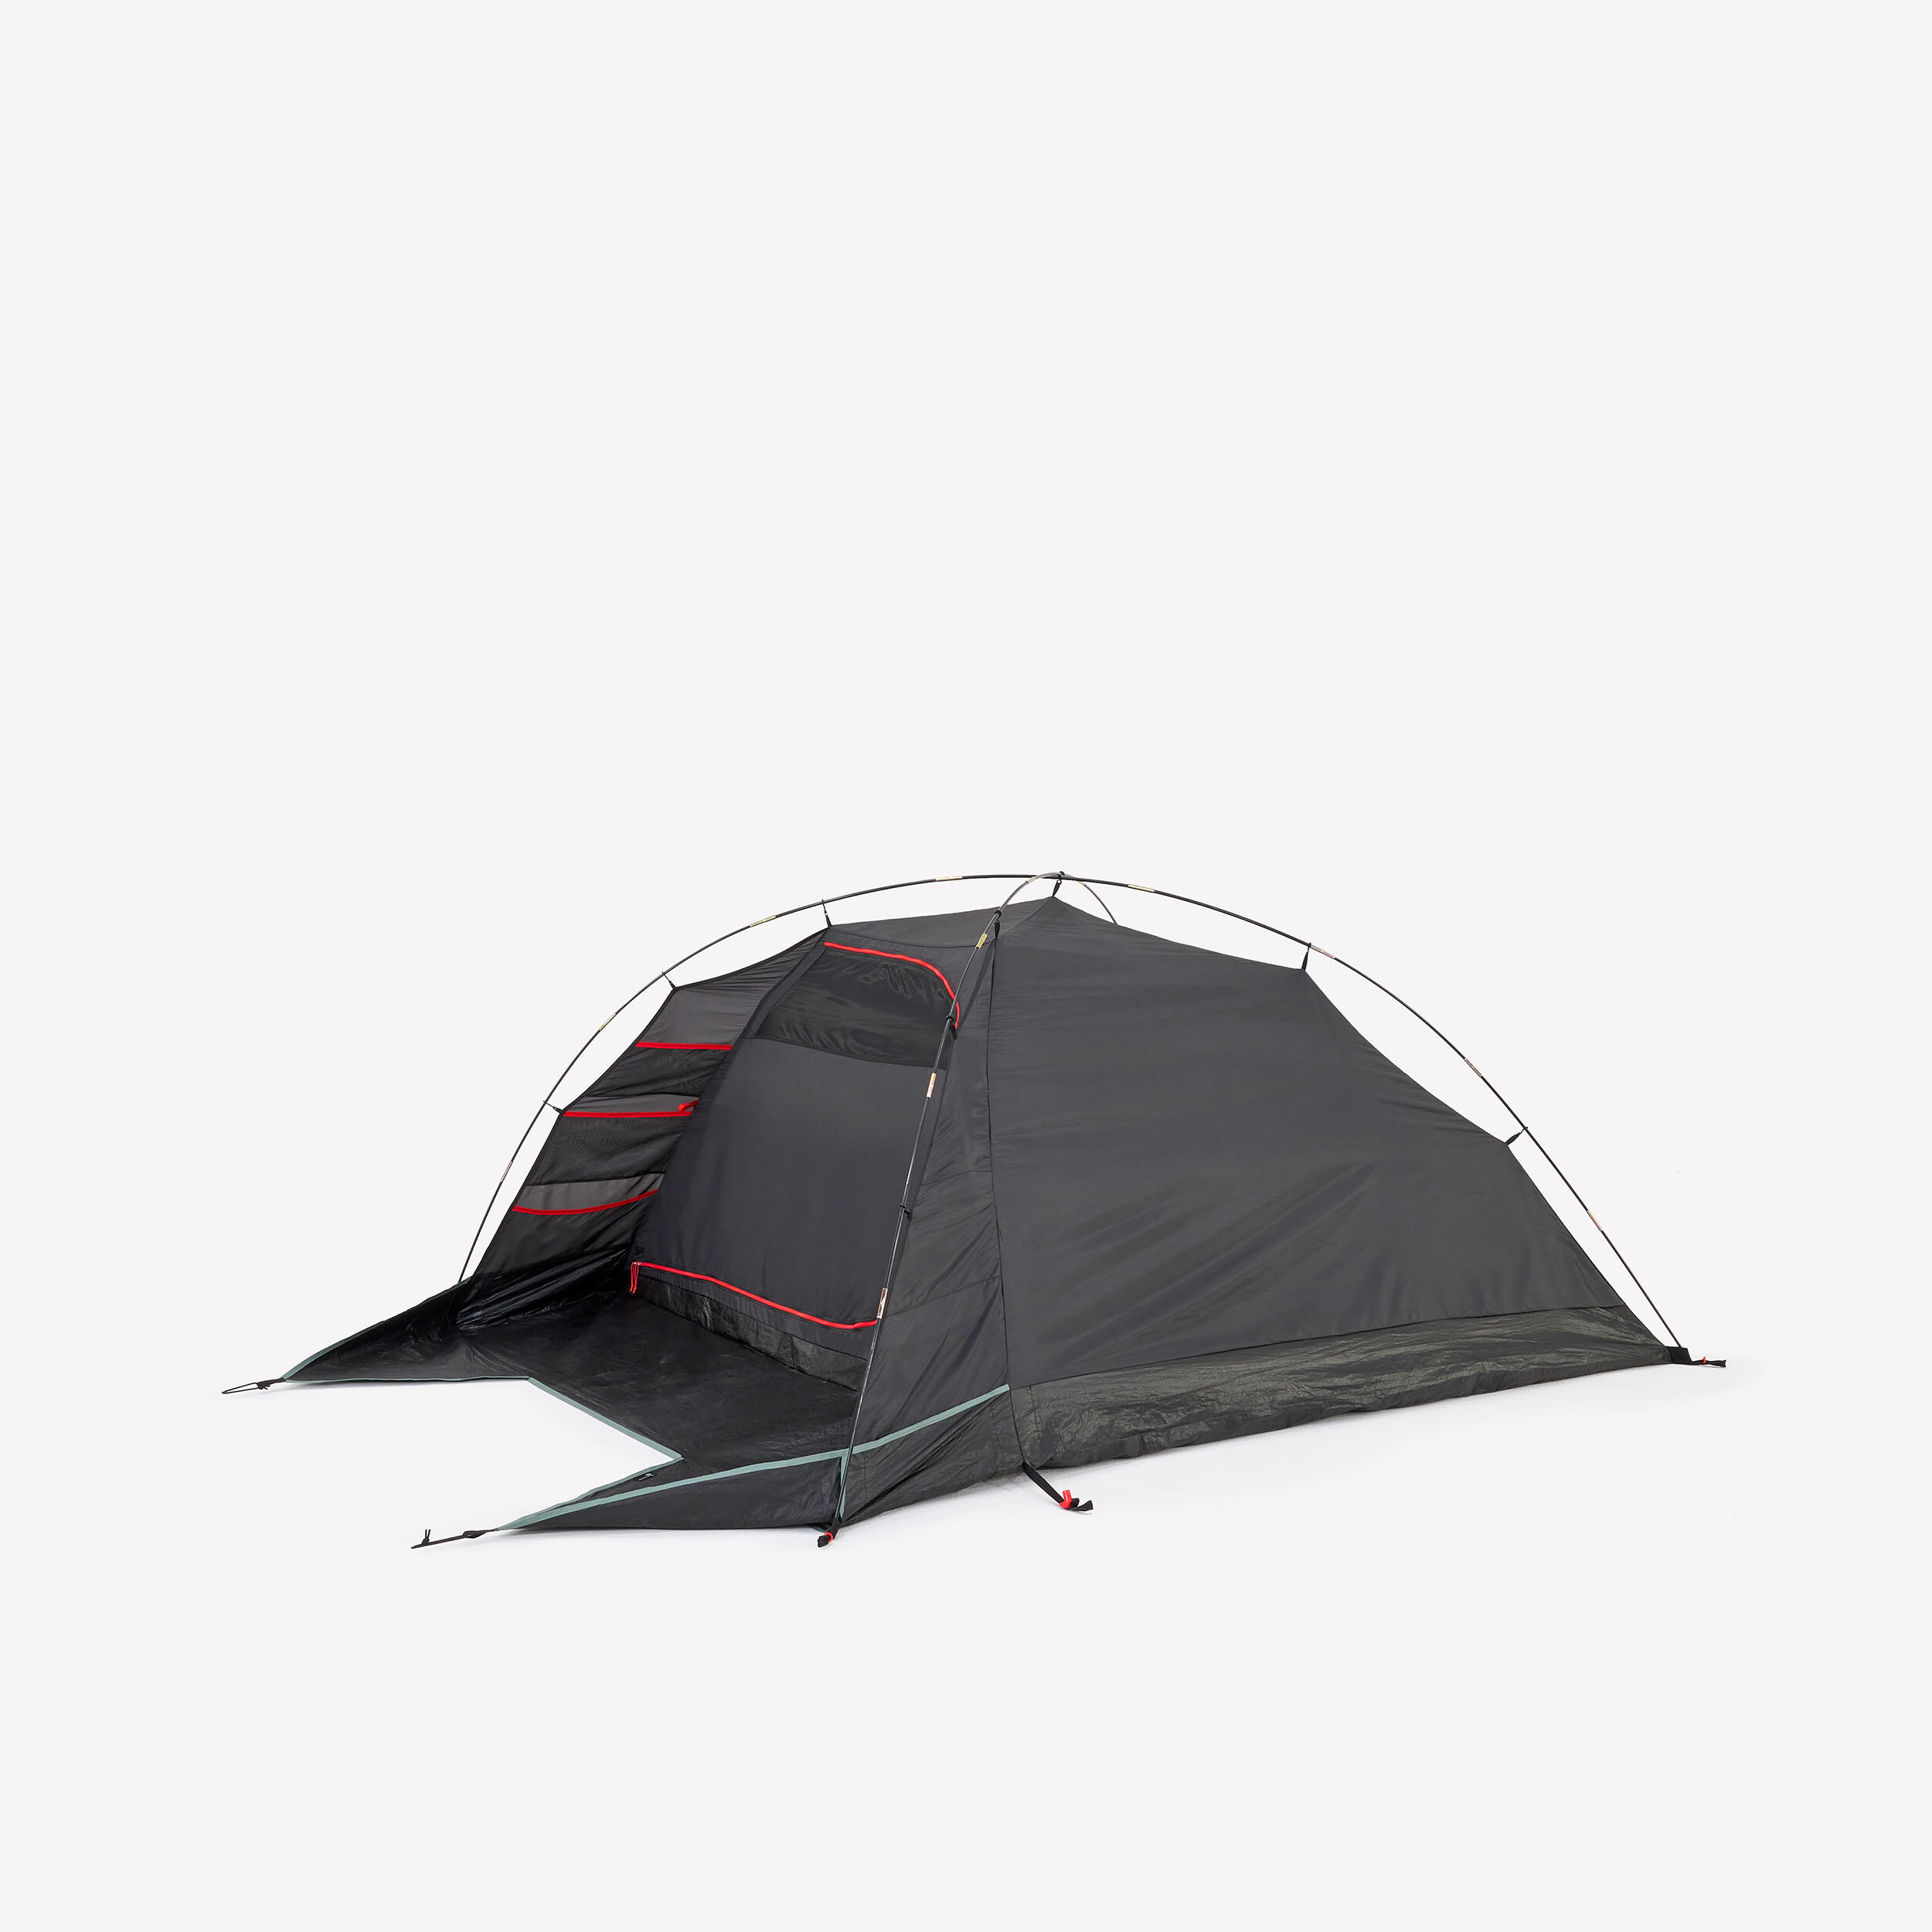 Camping Tent - MH100 XL - 3-Person 12/16